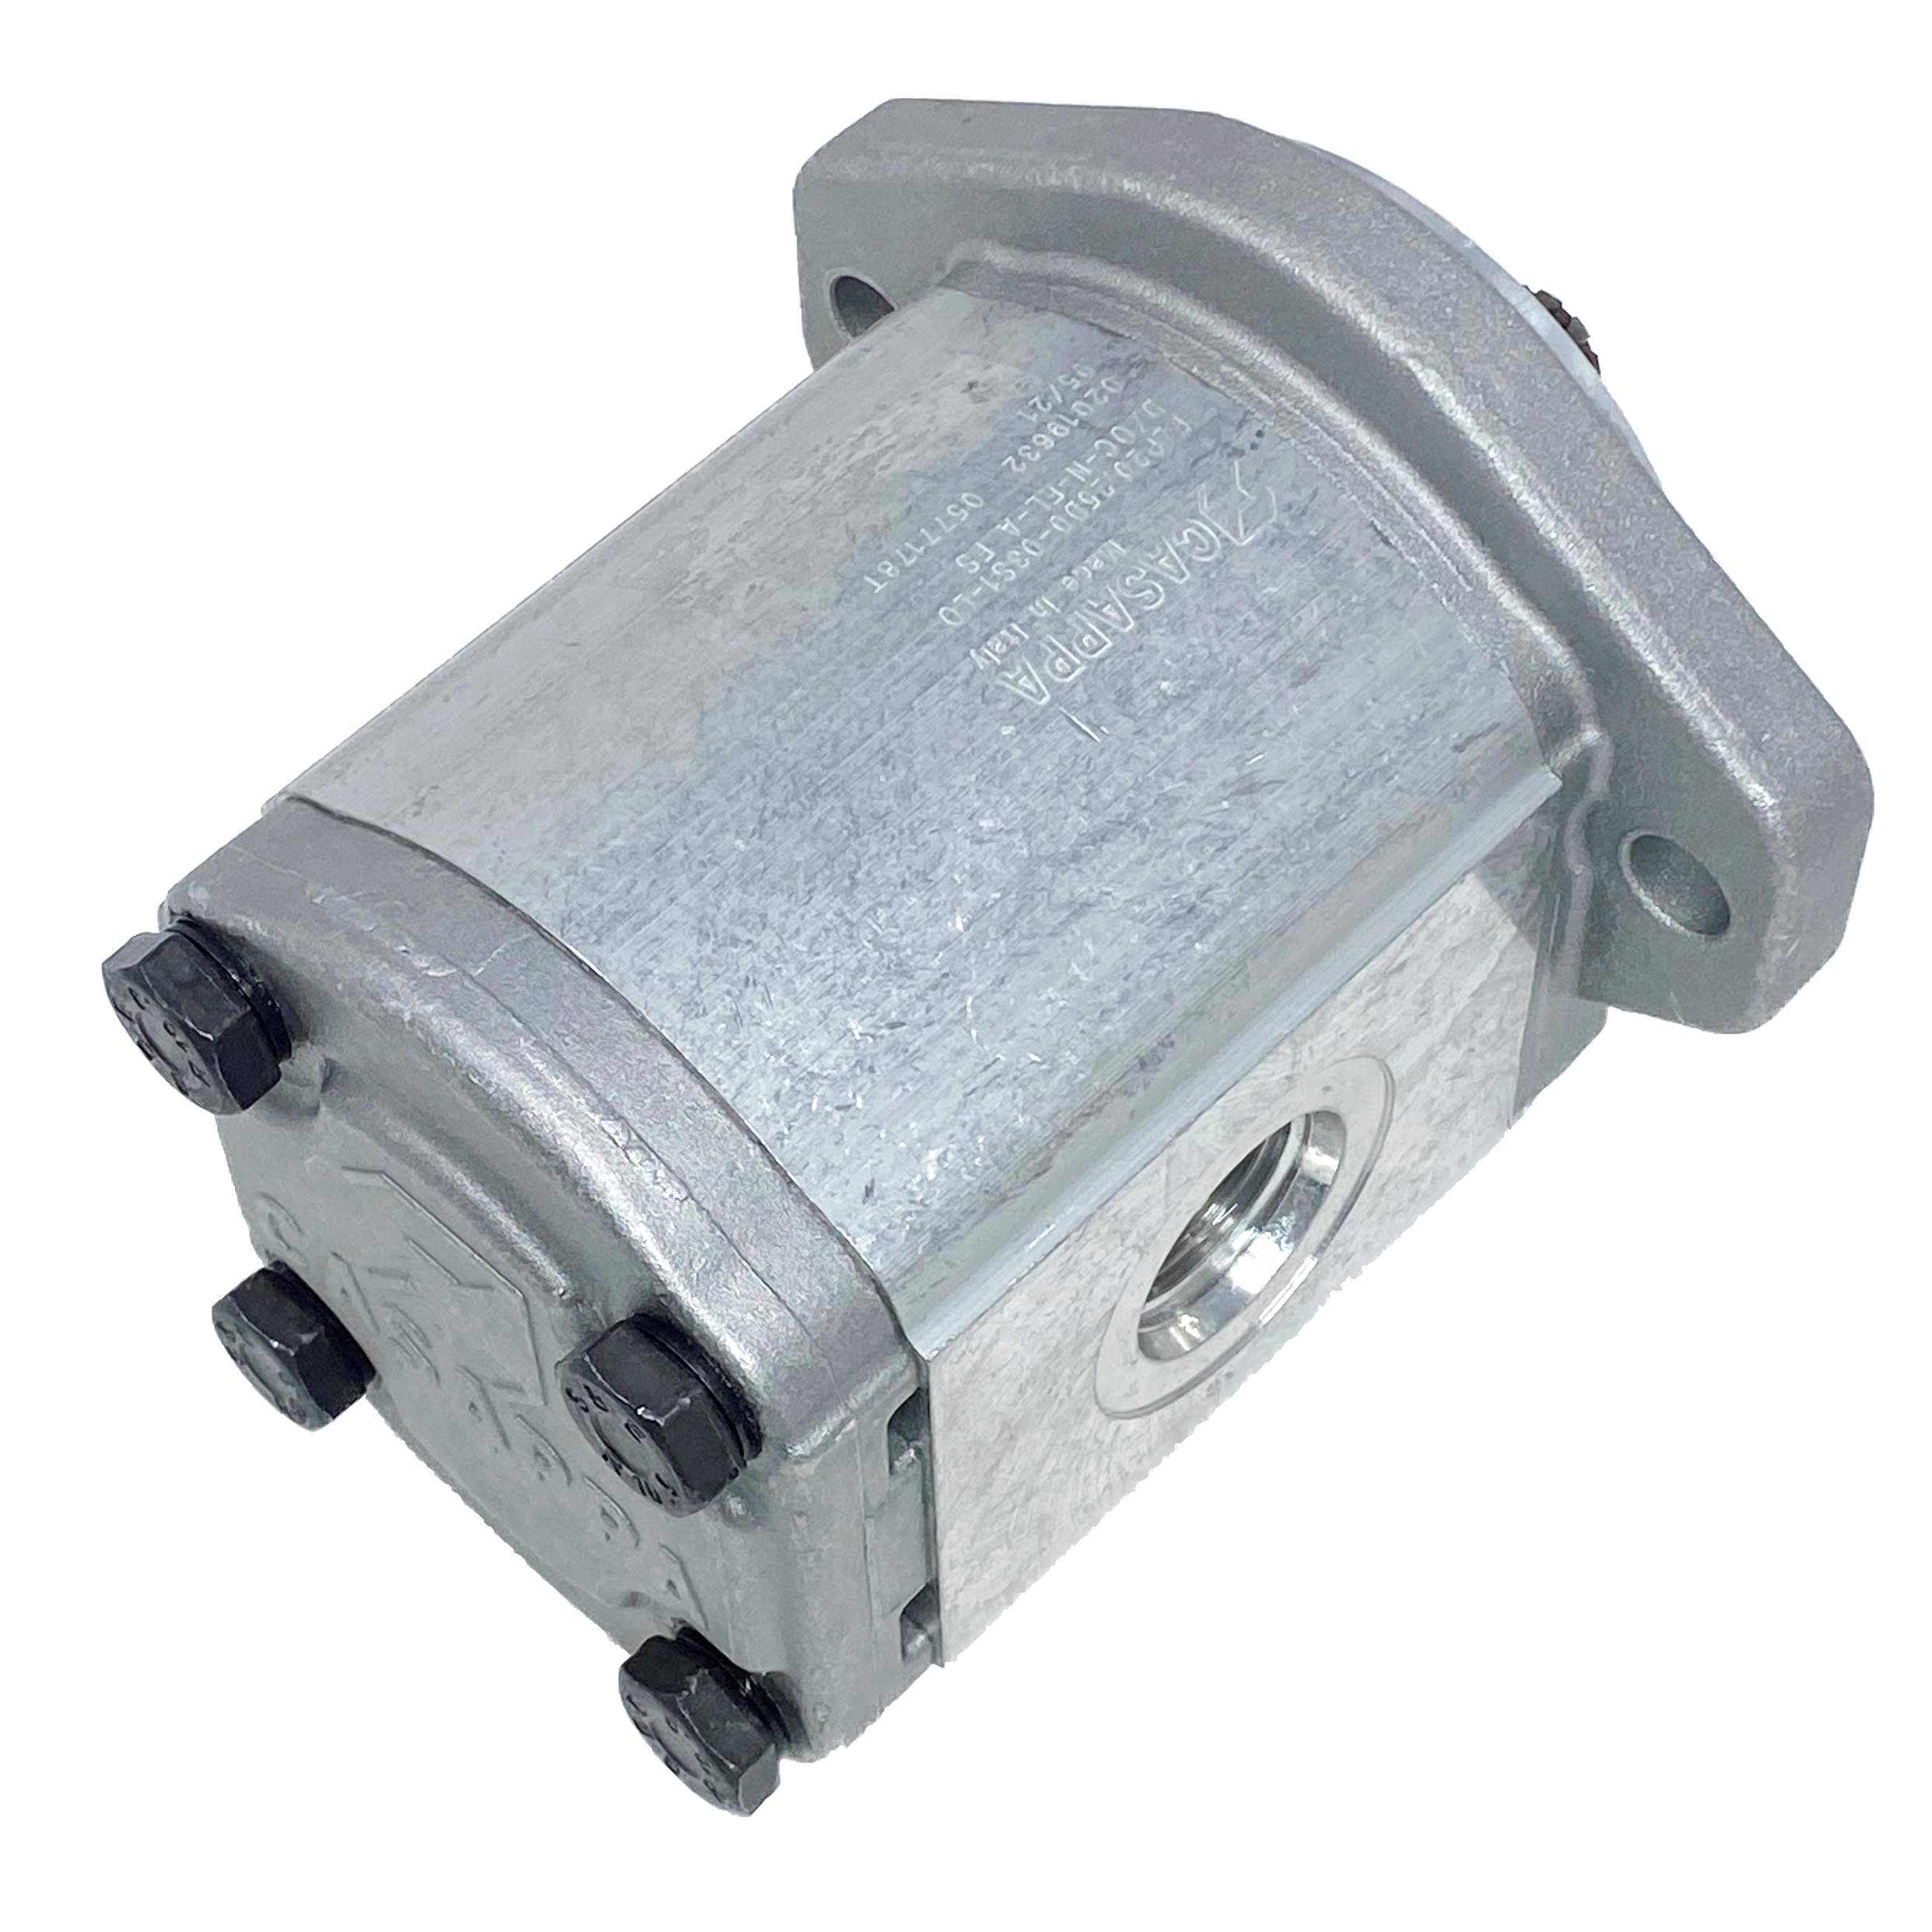 PHP20.31,5S0-03S9-LOG/OC-N-EL : Casappa Polaris Gear Pump, 33.03cc, 2900psi Rated, 2500RPM, CCW, 9T 16/32dp Shaft, SAE A 2-Bolt Flange, 1.25" #20 SAE Inlet, 0.625 (5/8") #10 SAE Outlet, Cast Iron Body, Aluminum Flange